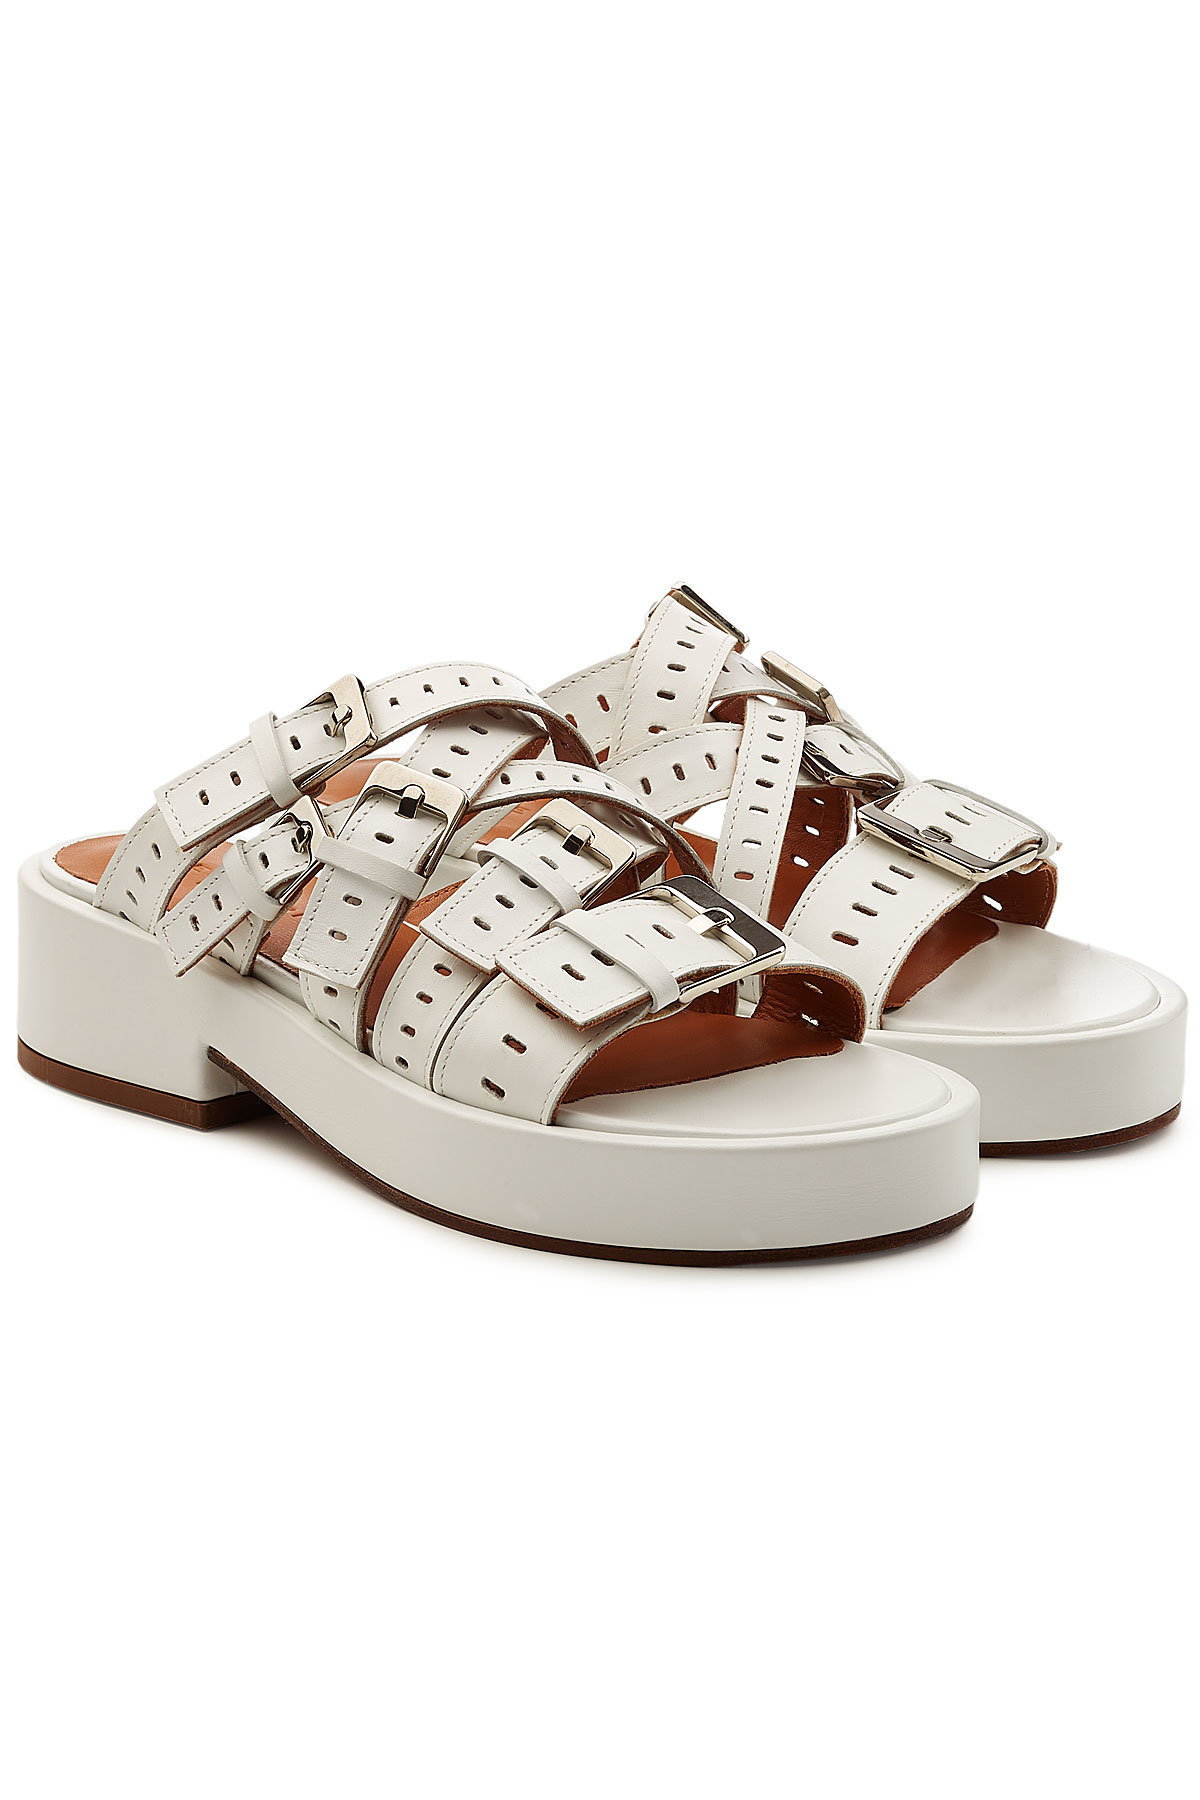 Fantom Leather Sandals by Robert Clergerie